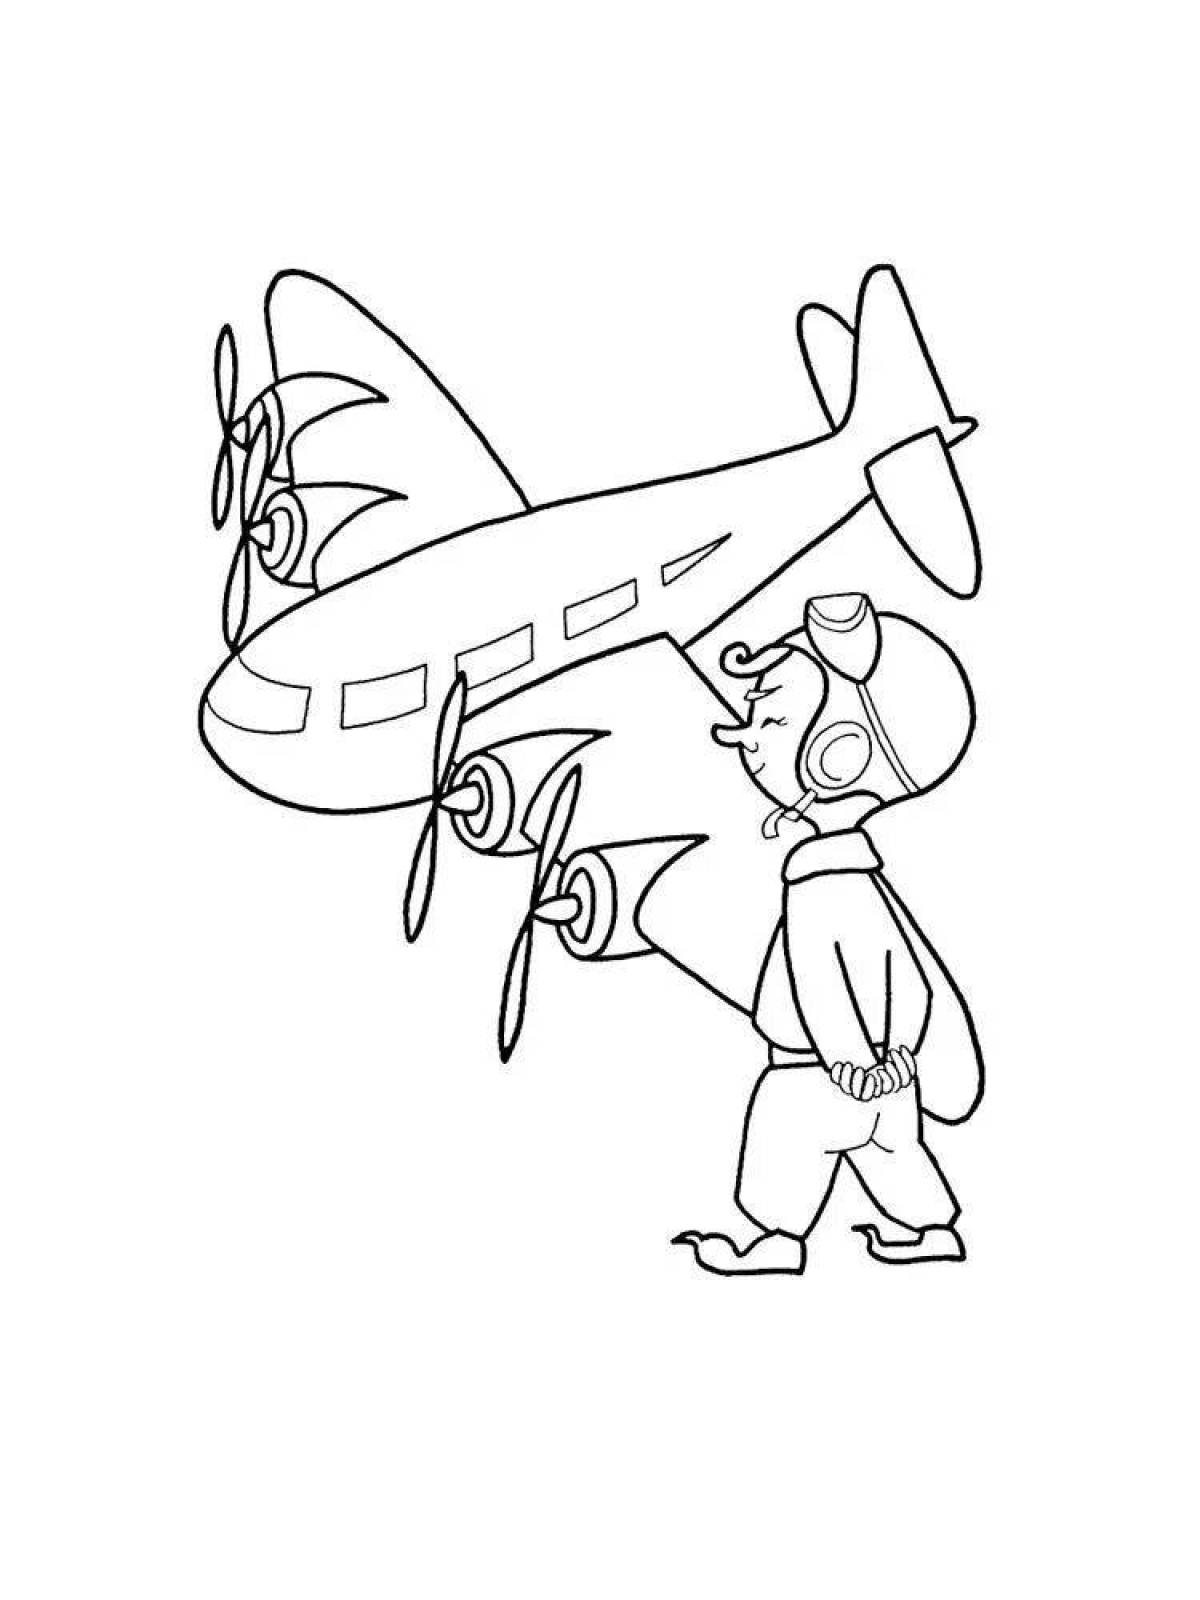 Adorable Baby Pilot Coloring Page